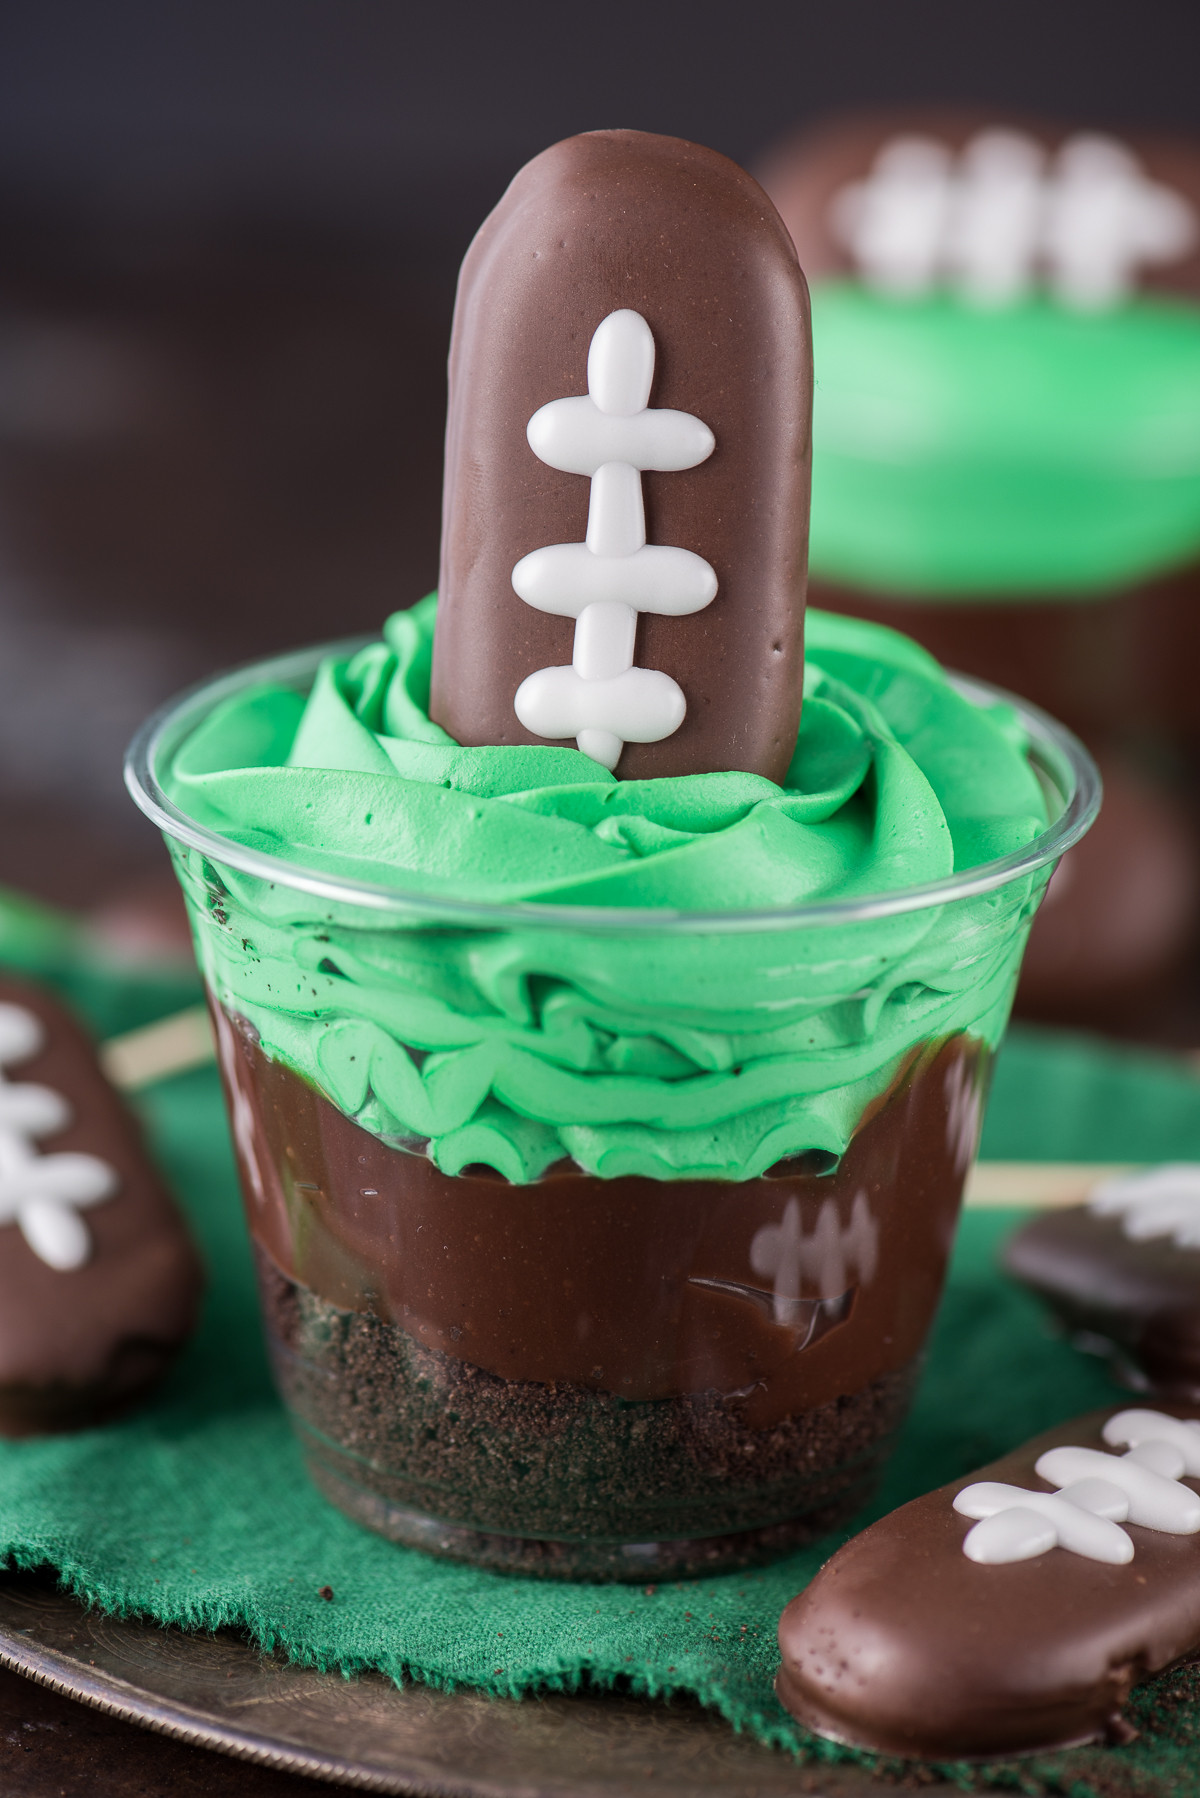 Football Desserts Recipes
 13 Football Shaped Desserts for an Awesome Super Bowl Party